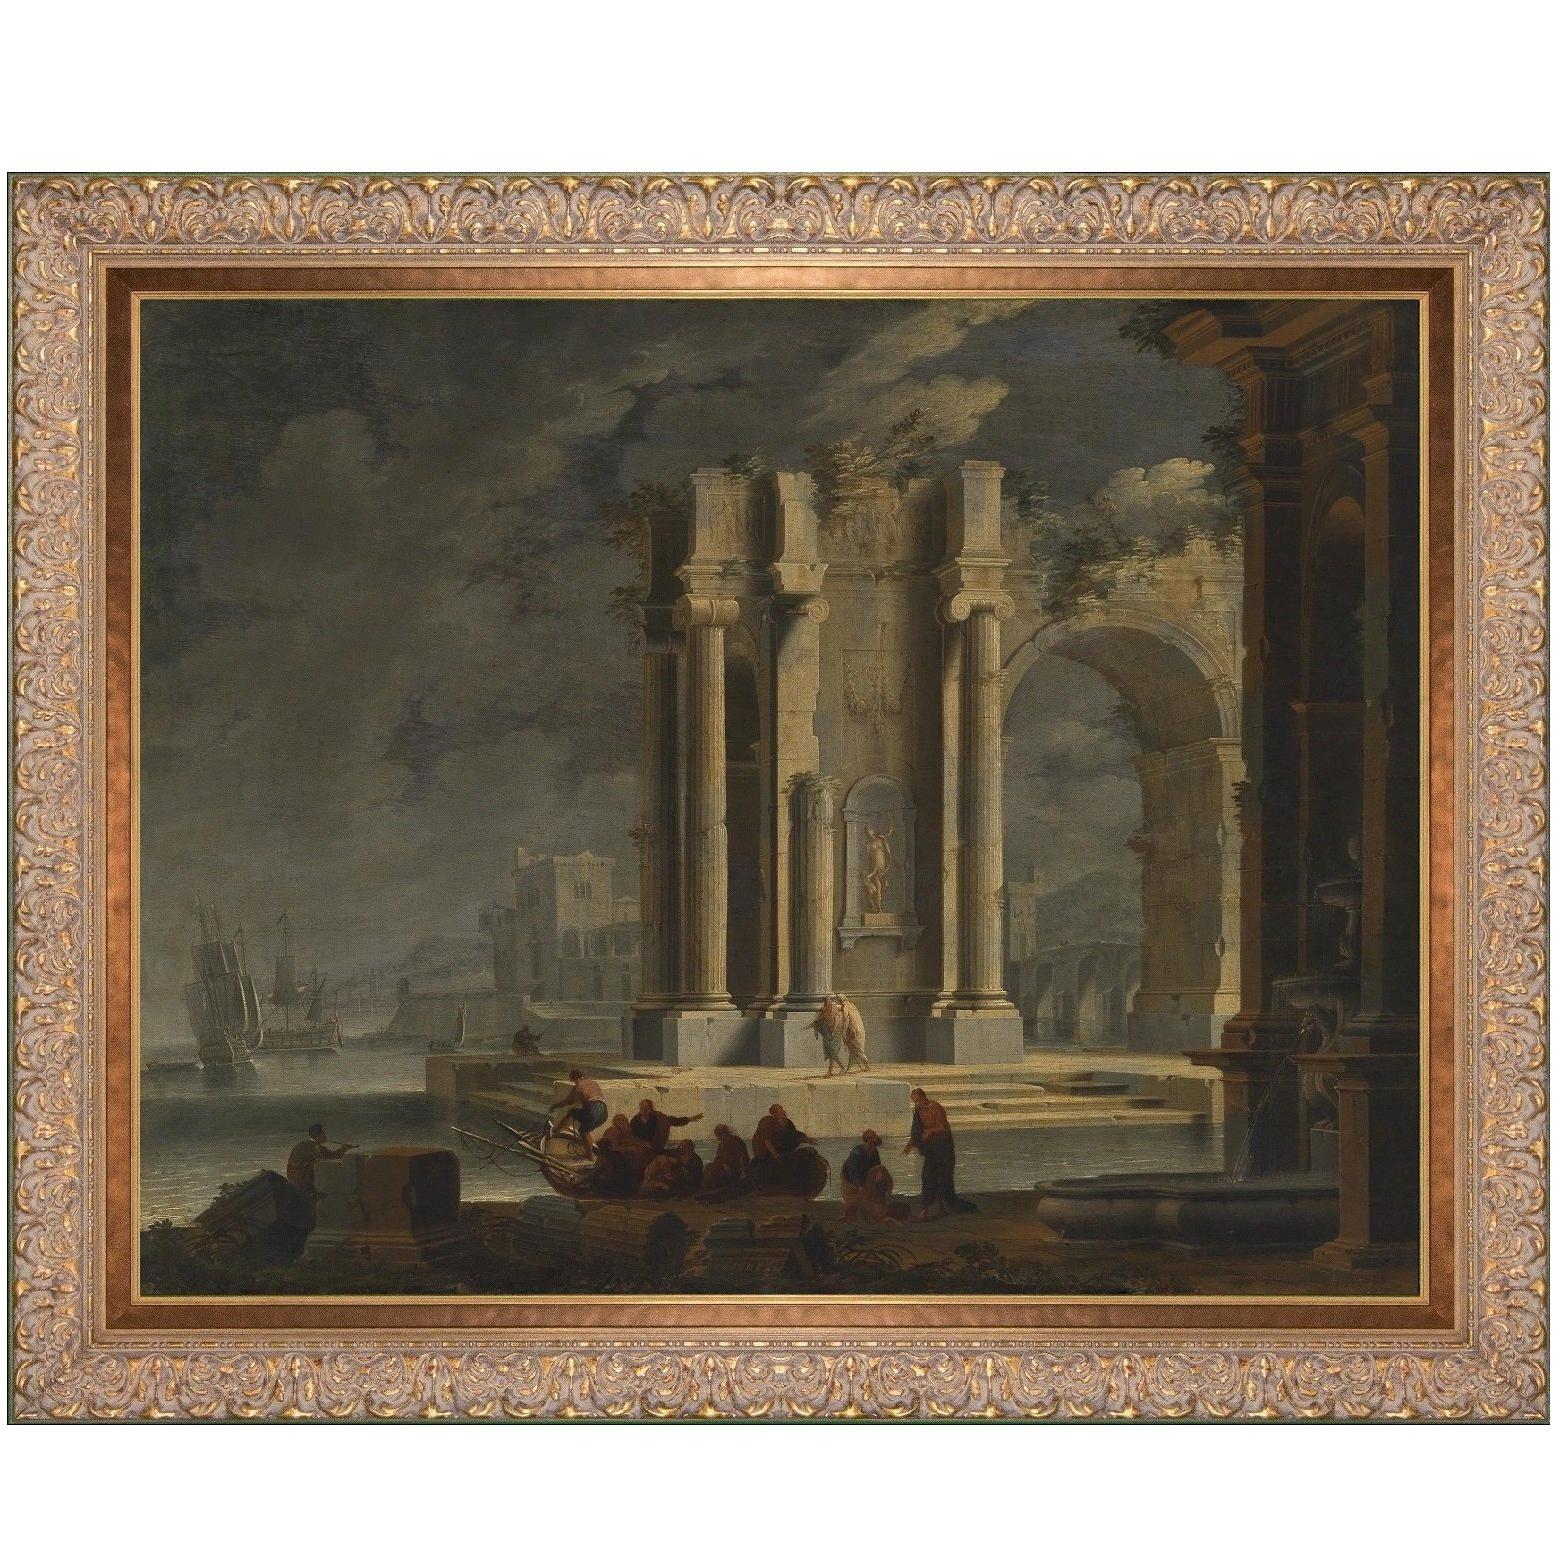 Roman Ruins of Nimes France, after Louis XV Era Oil Painting by Adrien Manglard For Sale